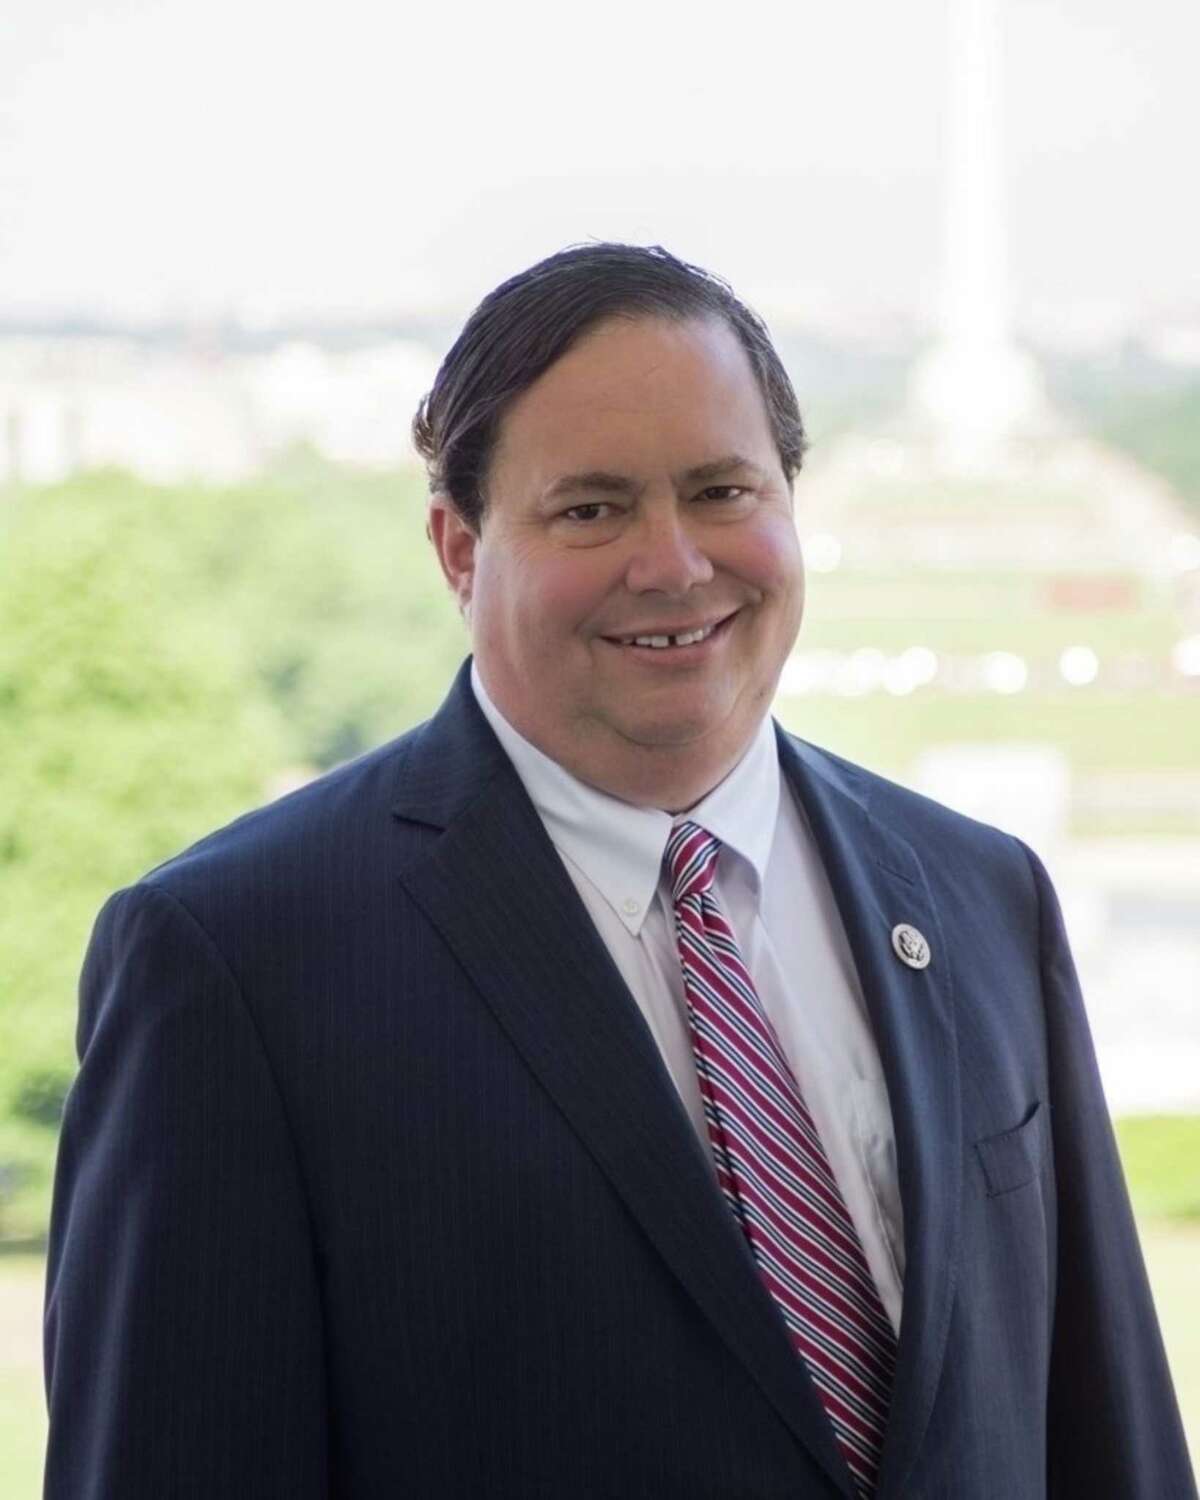 Rep. Blake Farenthold, R-Corpus Christi, has opted to not seek reelection following allegations of sexual and other misconduct with staffers.